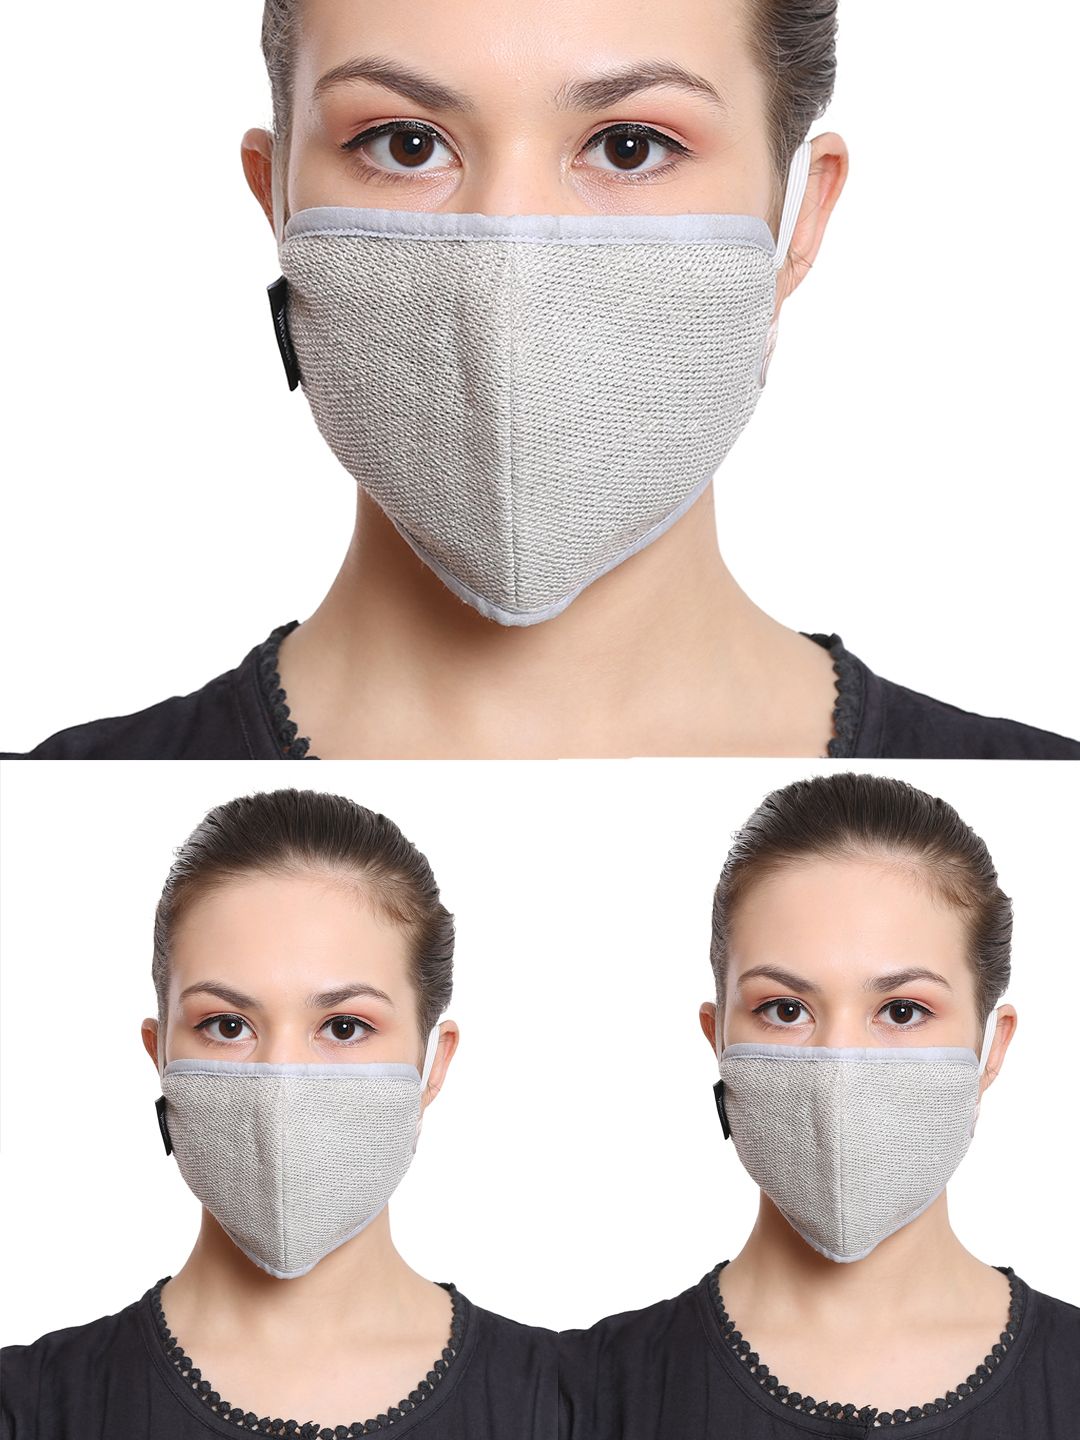 Anekaant Women 3 Pcs 3-Ply Reusable Cotton Lurex Fabric Protective Outdoor Masks Price in India